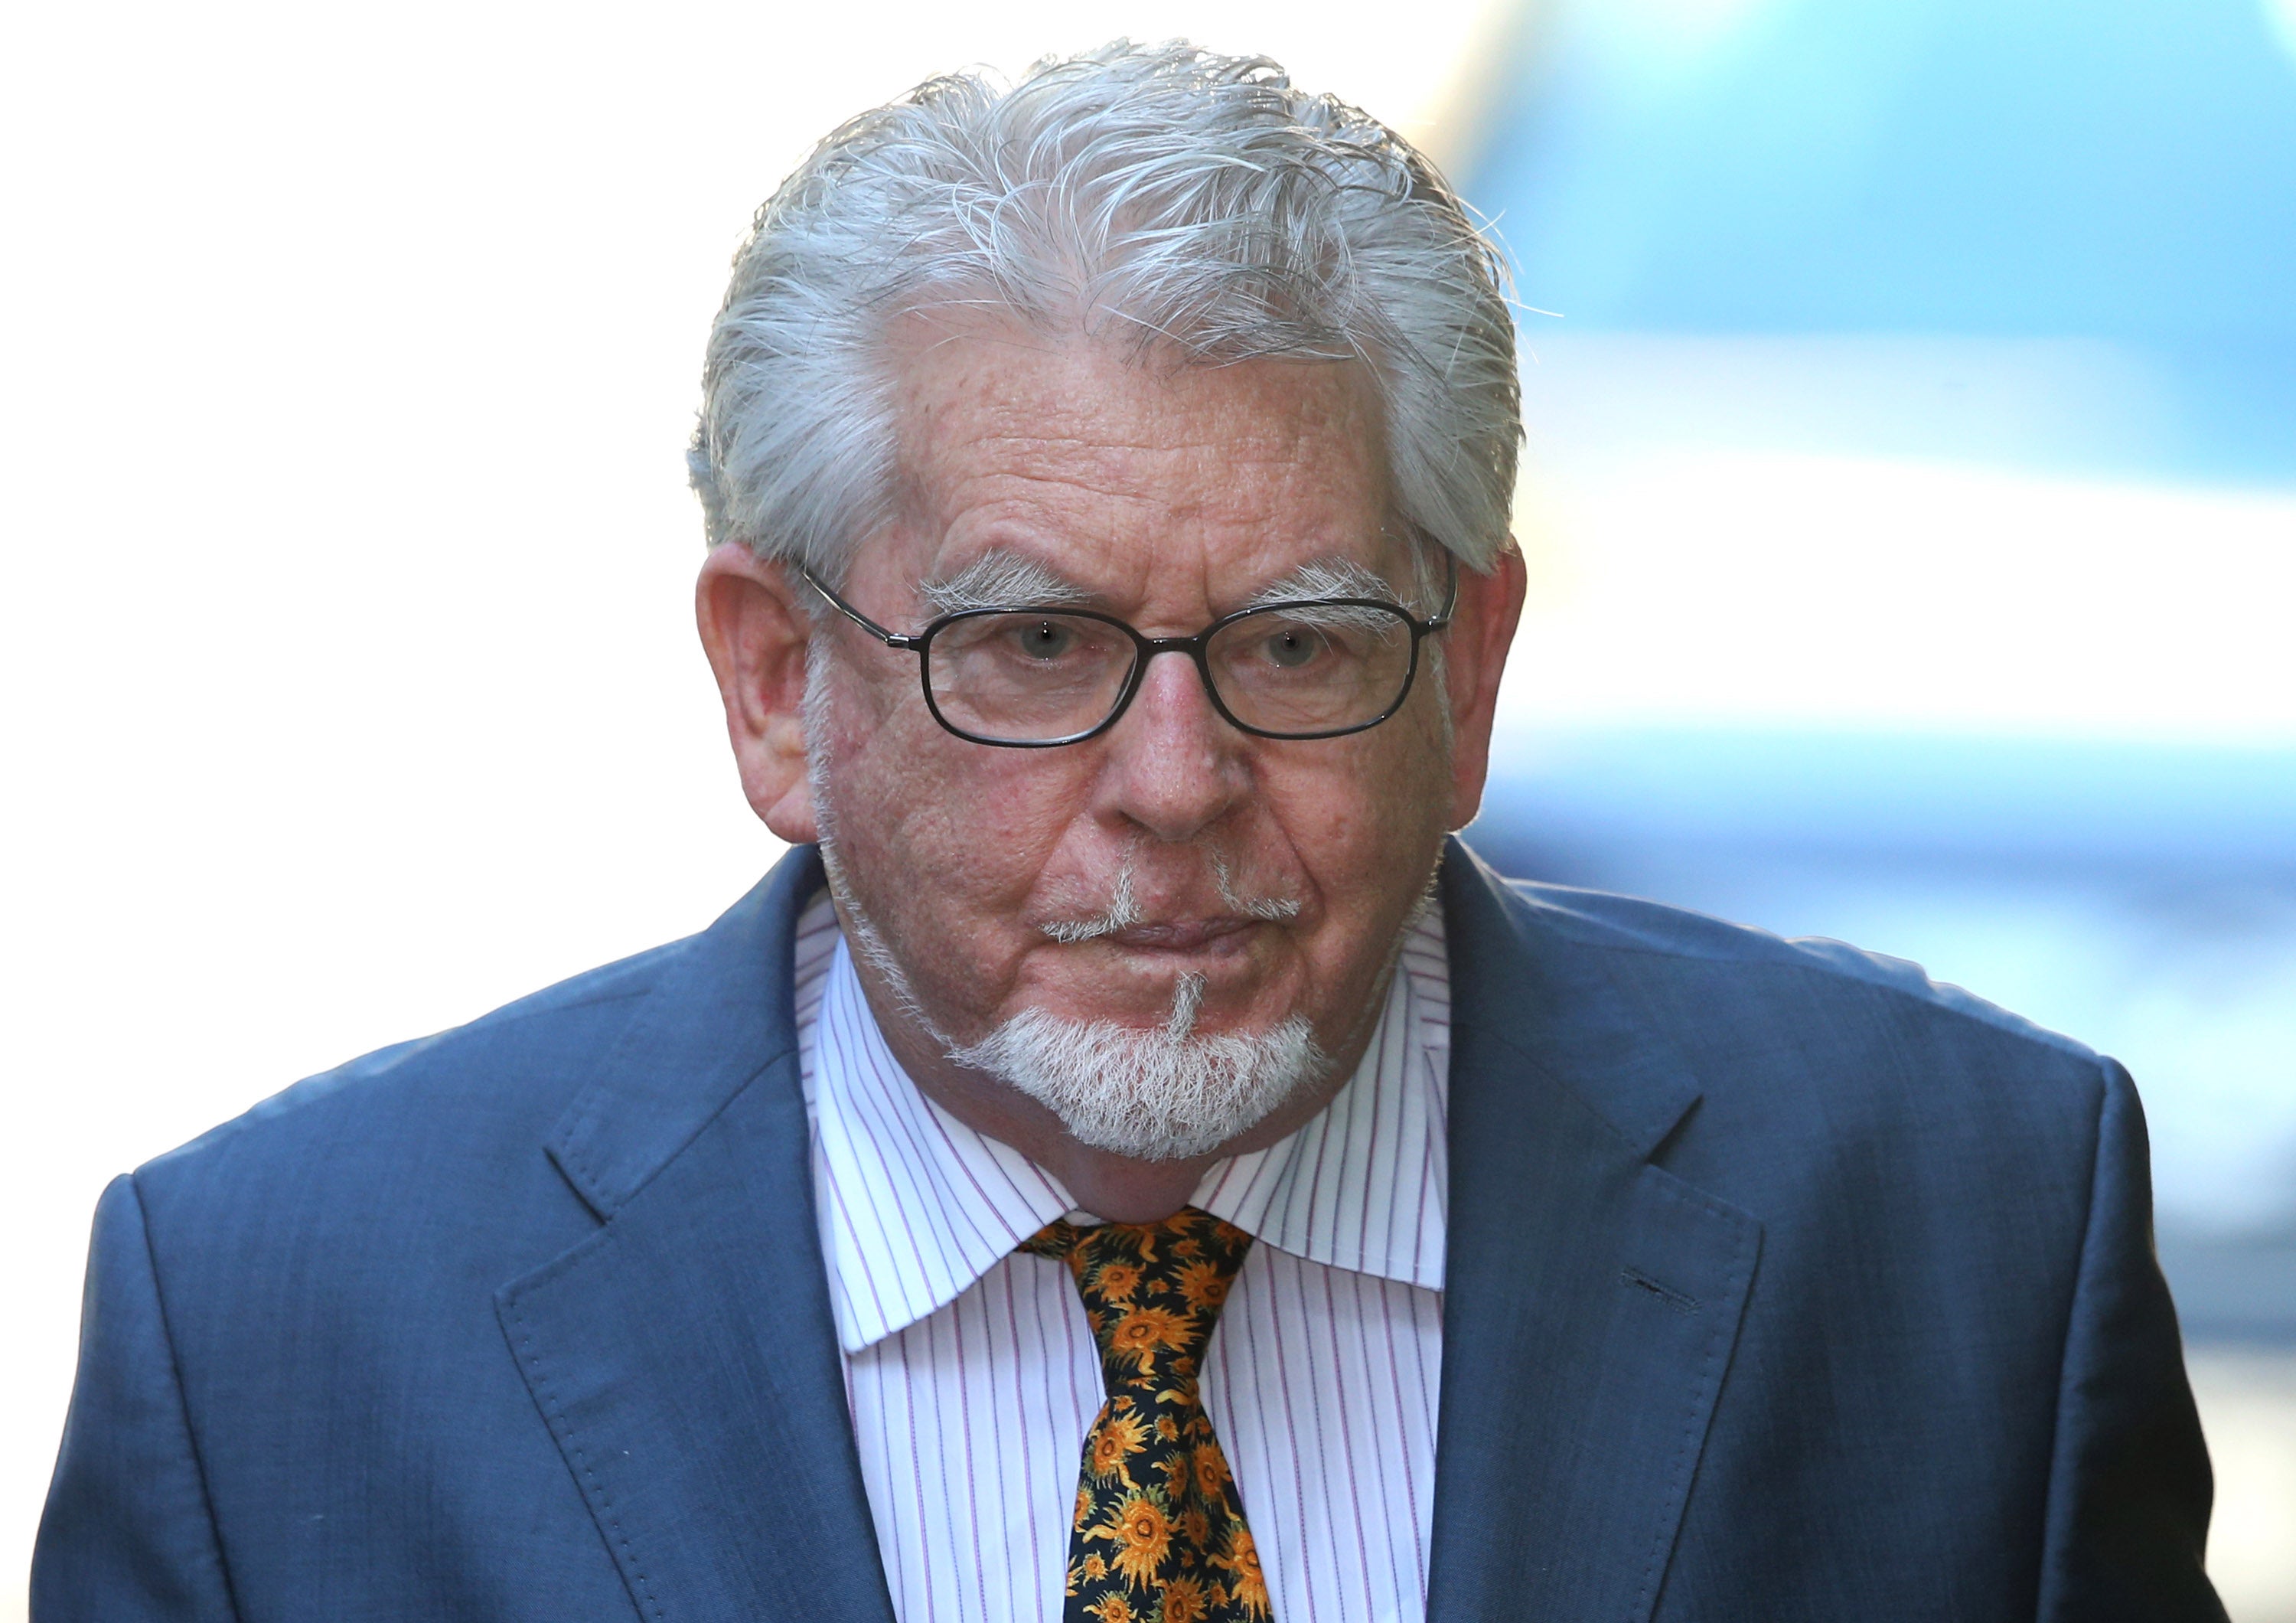 Police forces and prosecutors have previously said publicity around certain arrests - including shamed veteran presenters Rolf Harris - led to further victims coming forward